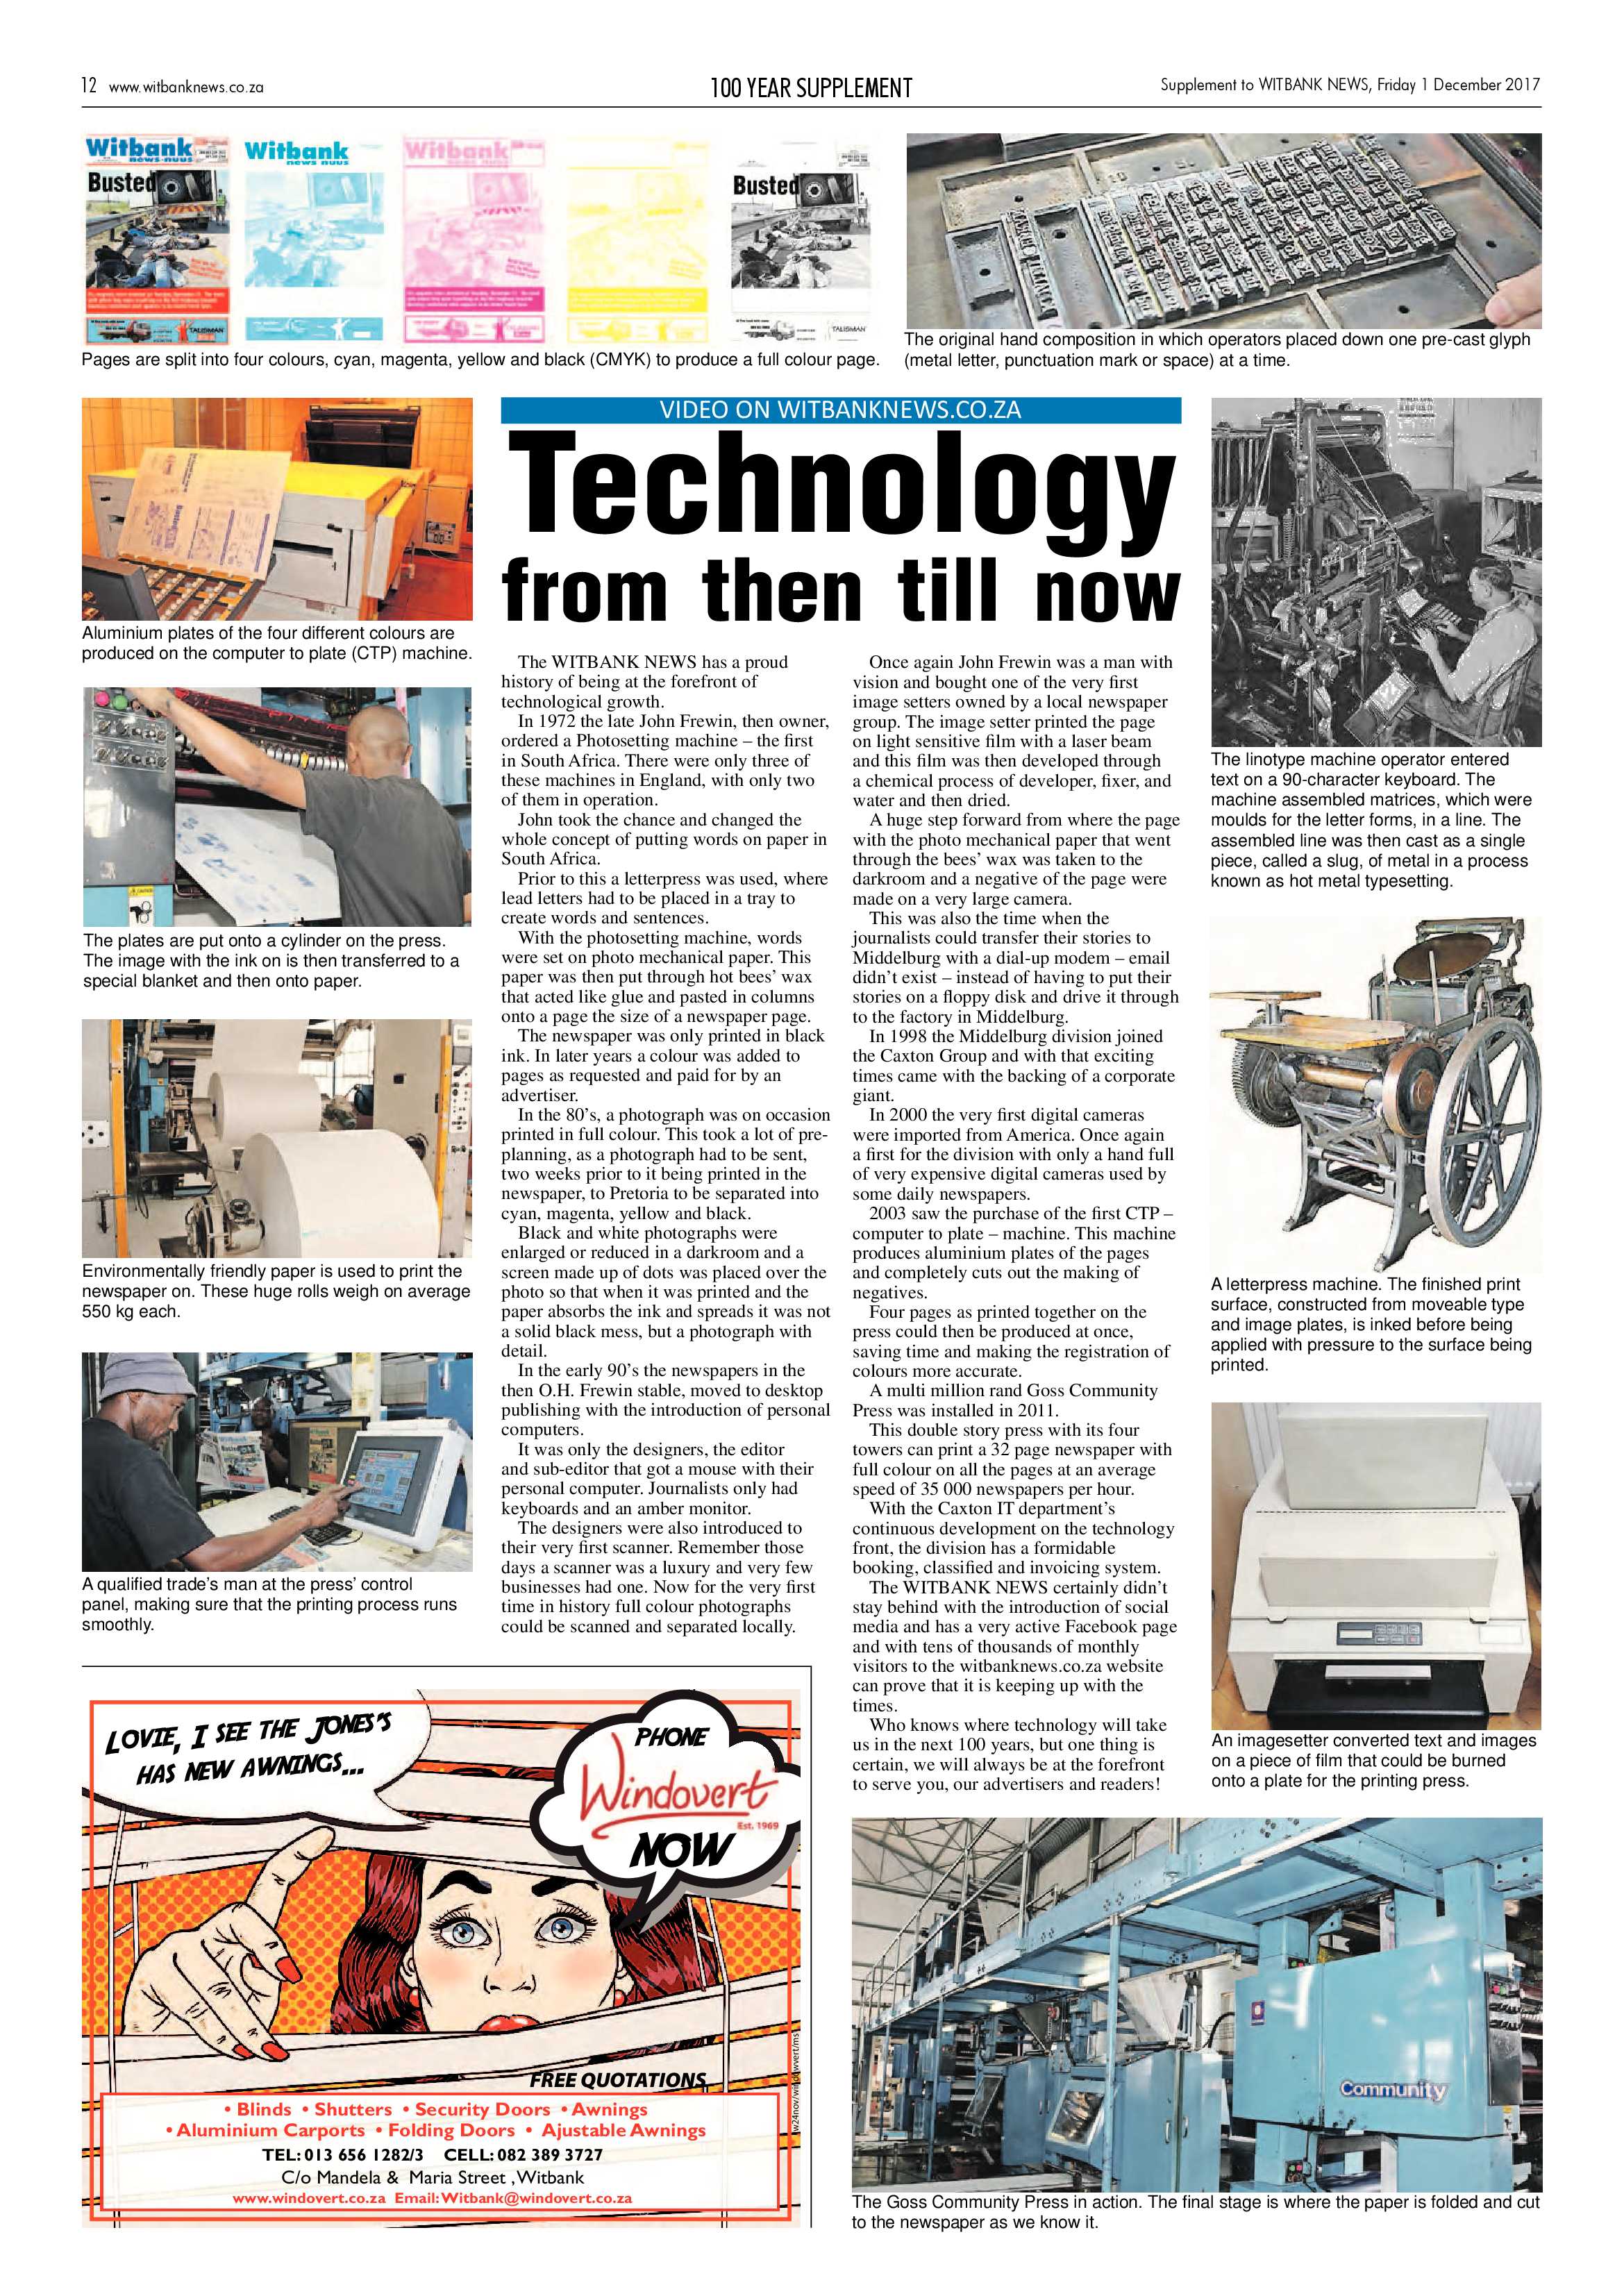 Witbank News 100 Year Supplement page 12